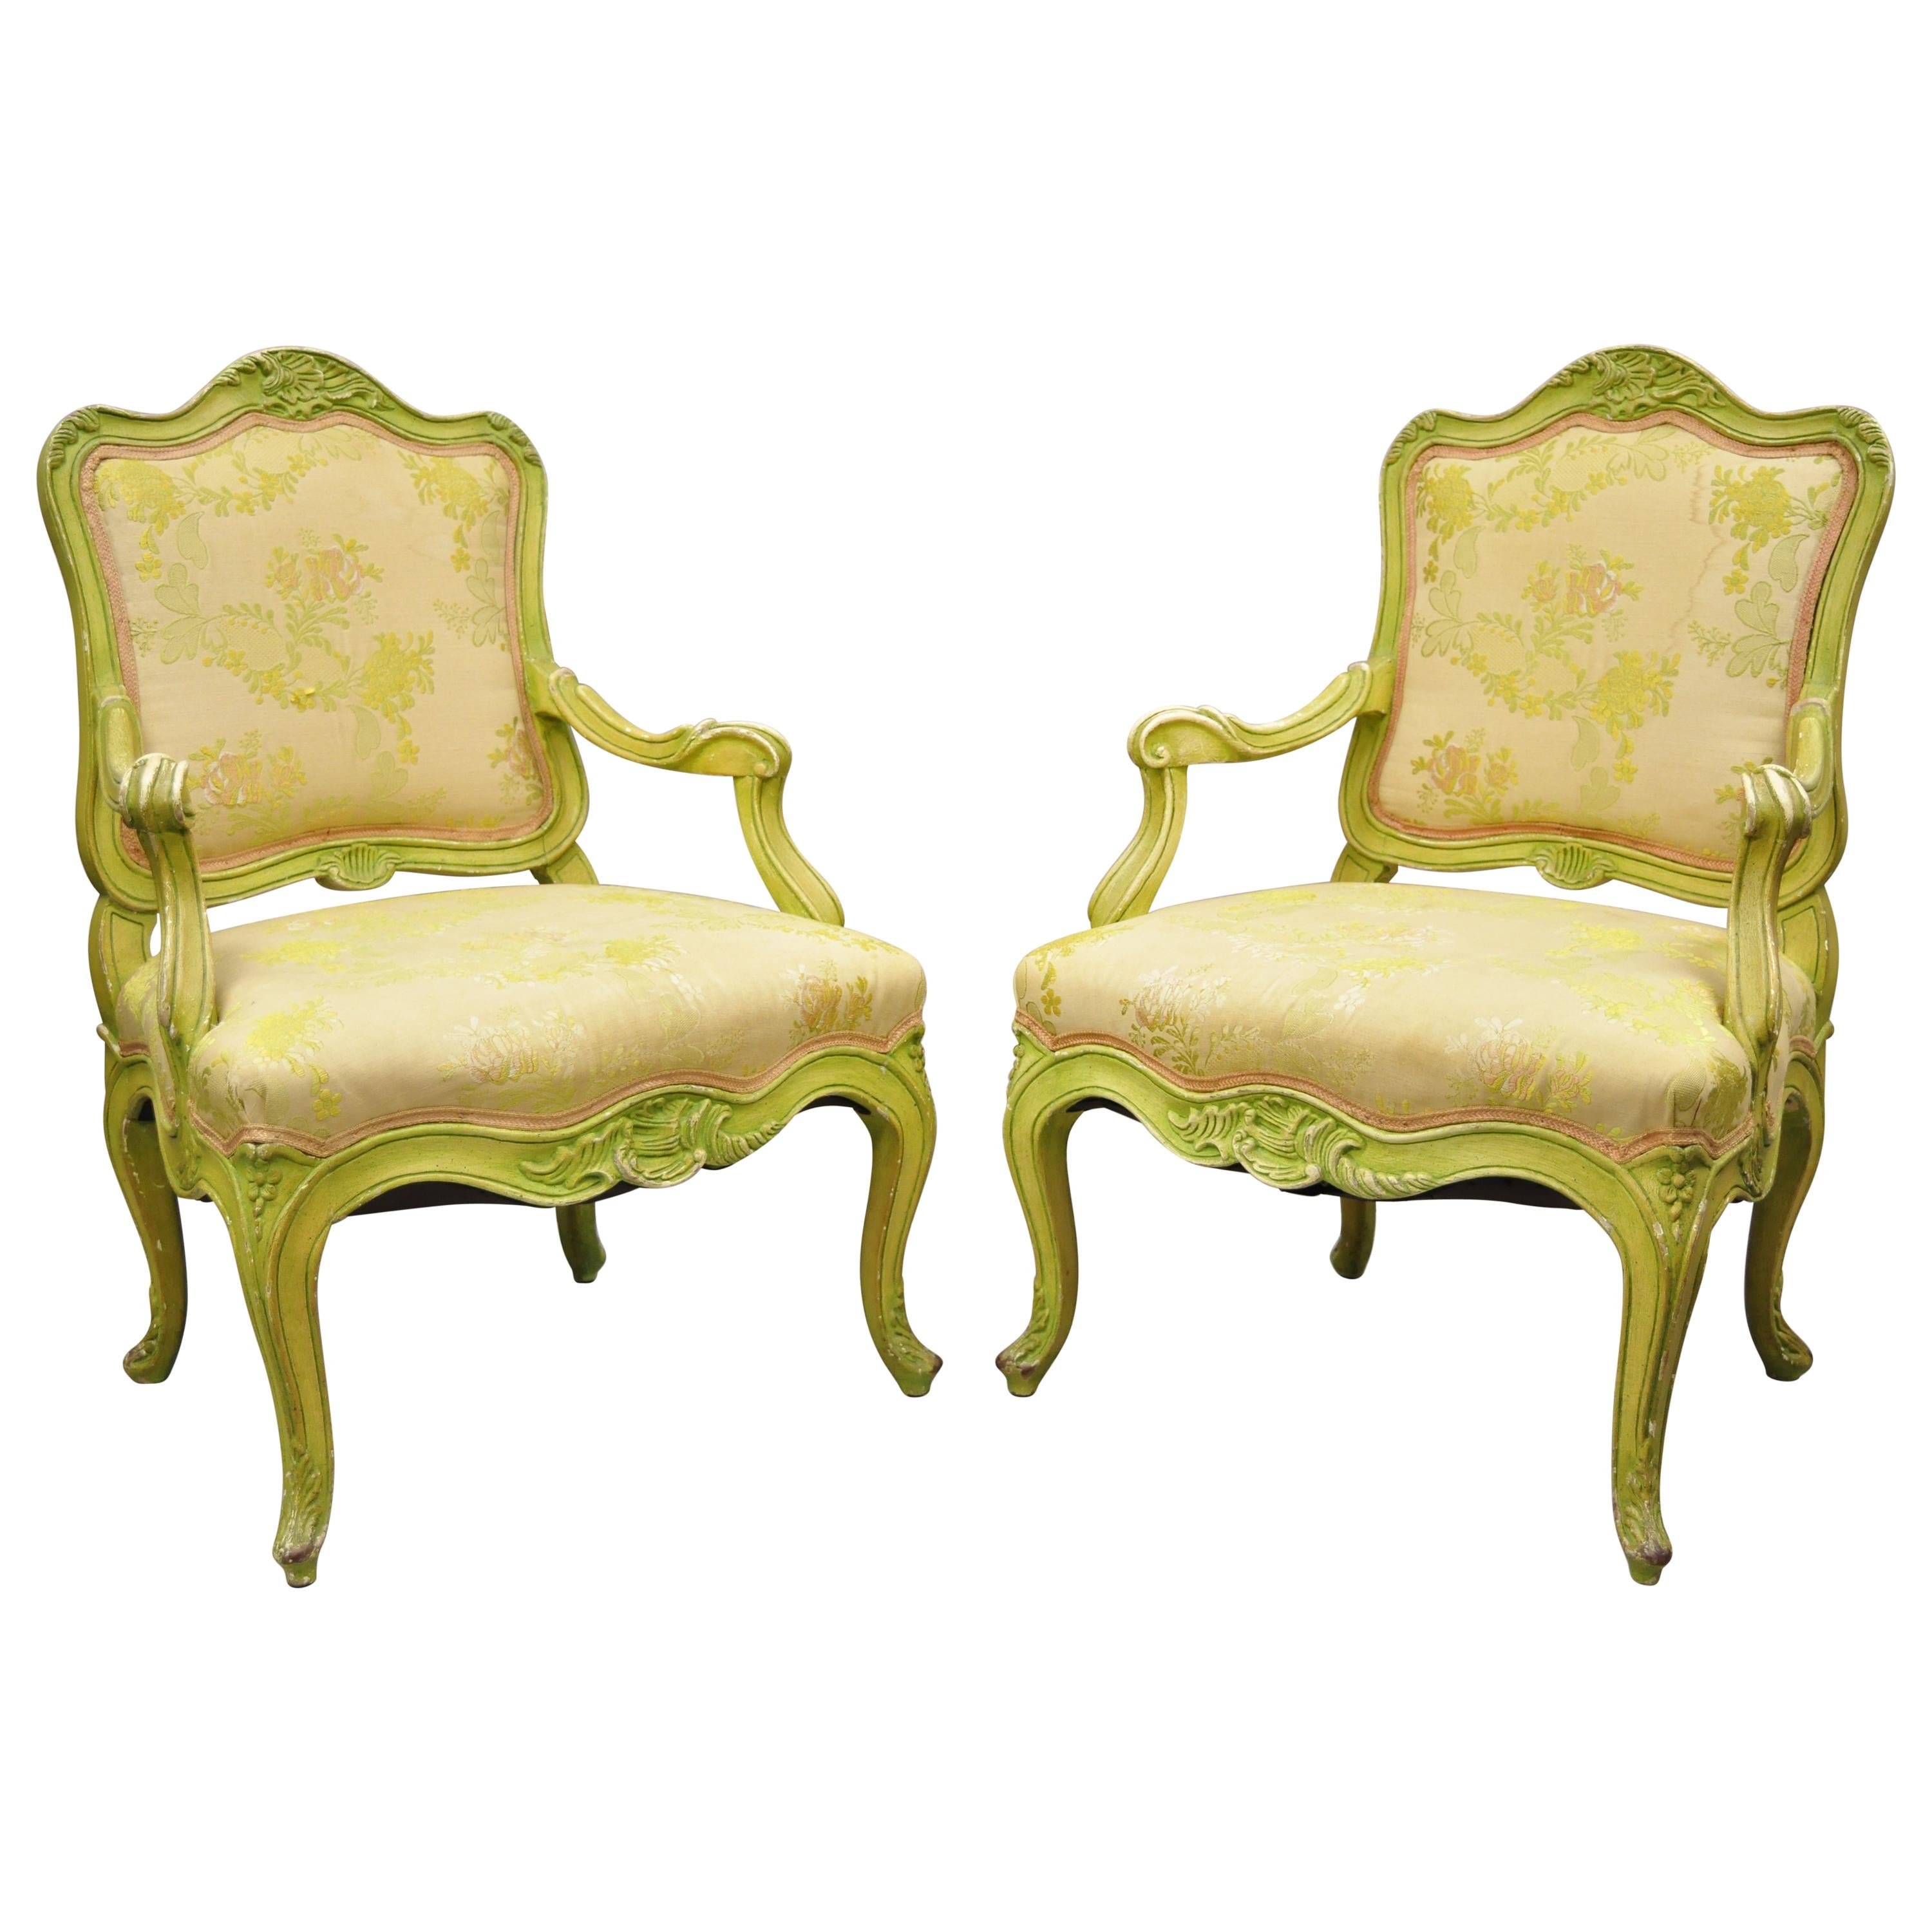 Italian Rococo Hollywood Regency Green Painted Fireside Lounge Armchairs, Pair